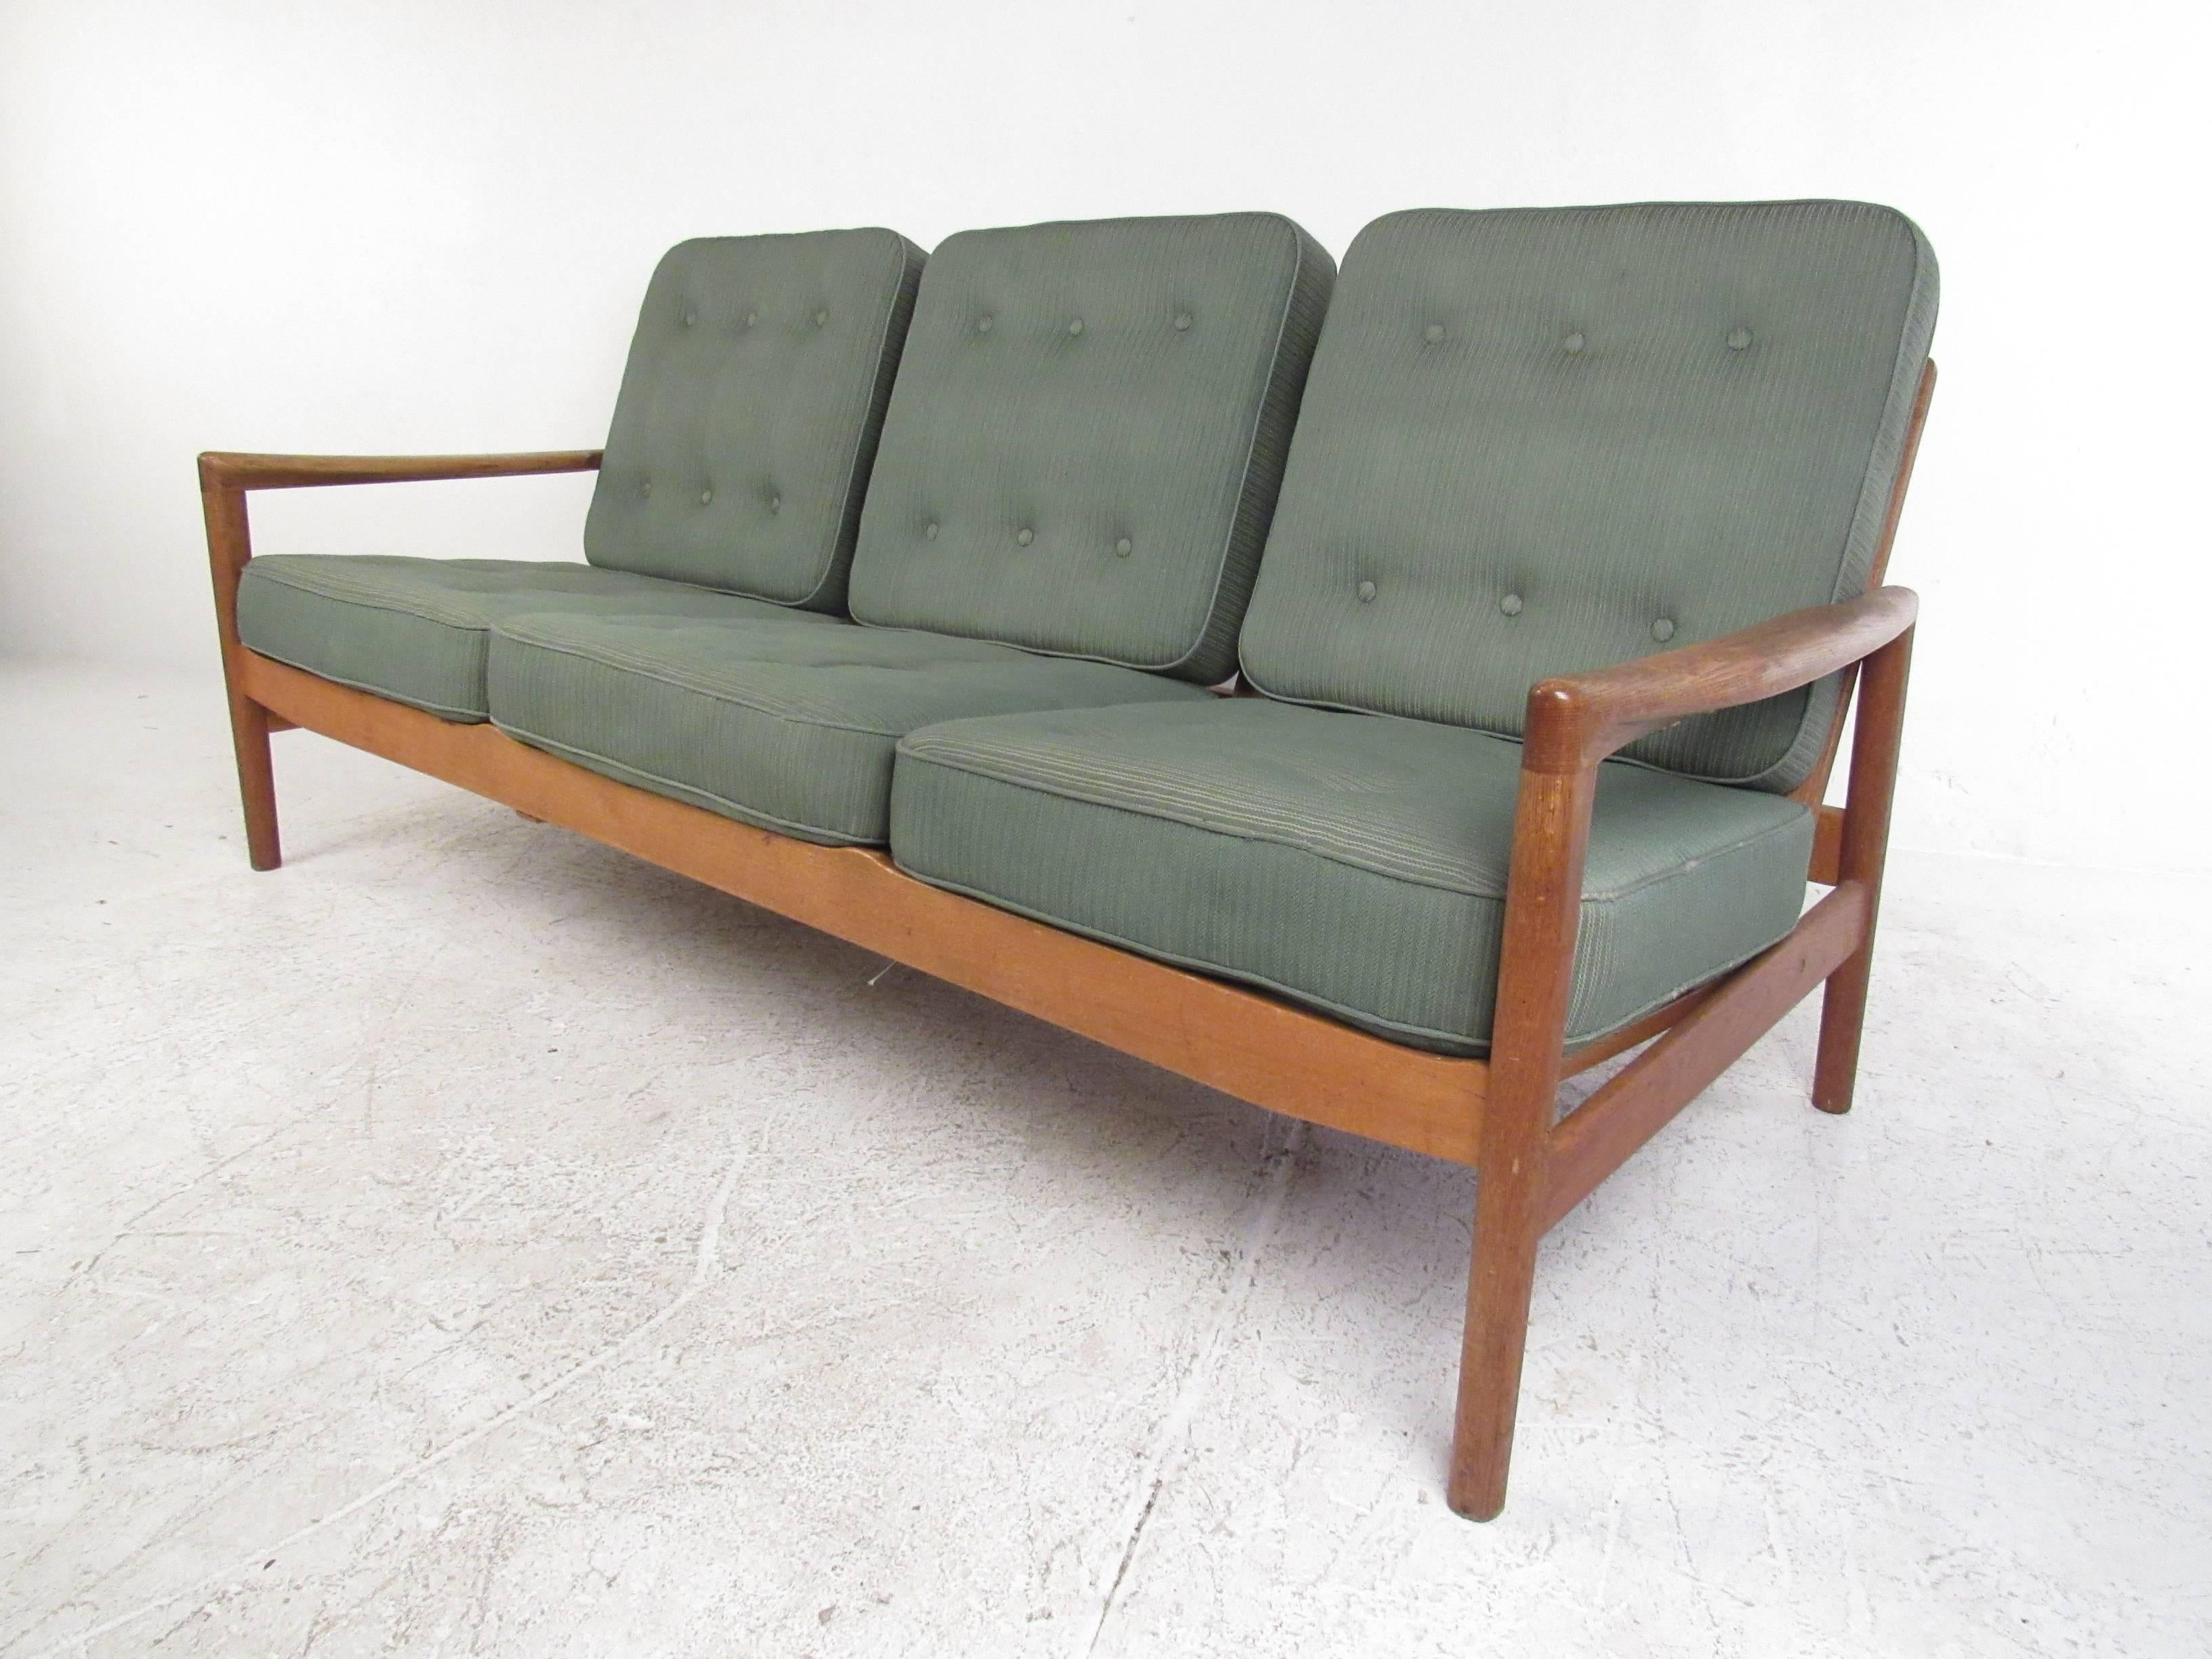 This vintage three-seat sofa features a unique sculpted arm frame with tufted cushions. Mid-Century Modern style meets timeless comfort with this versatile sofa, perfect for home or business. Please confirm item location (NY or NJ).